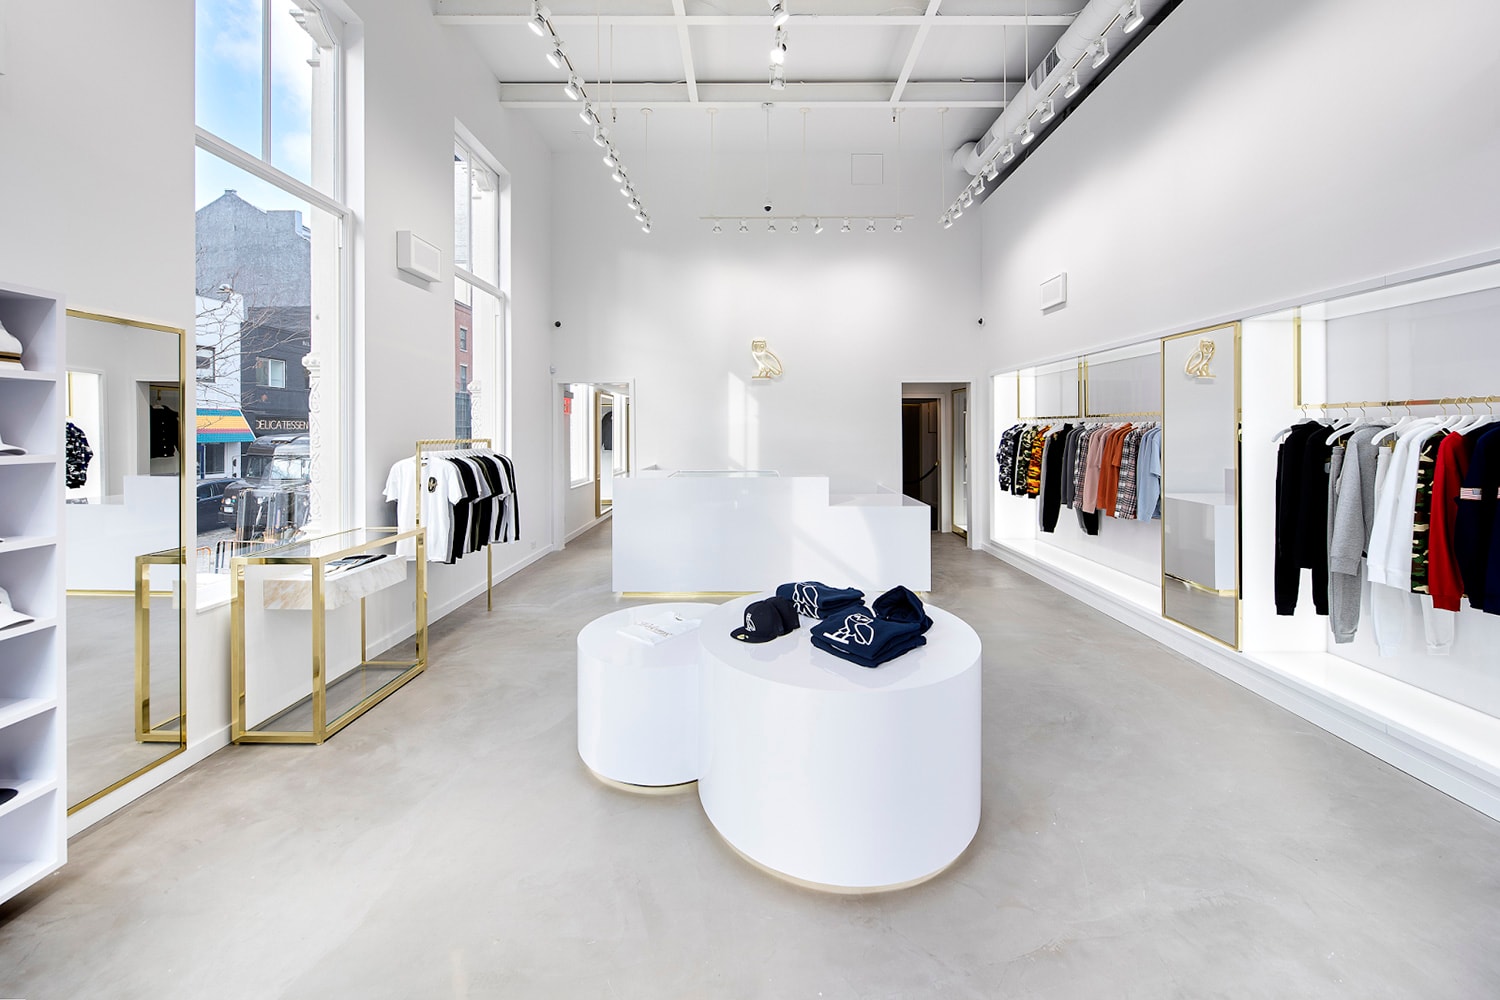 Reebok's flagship store open in NYC